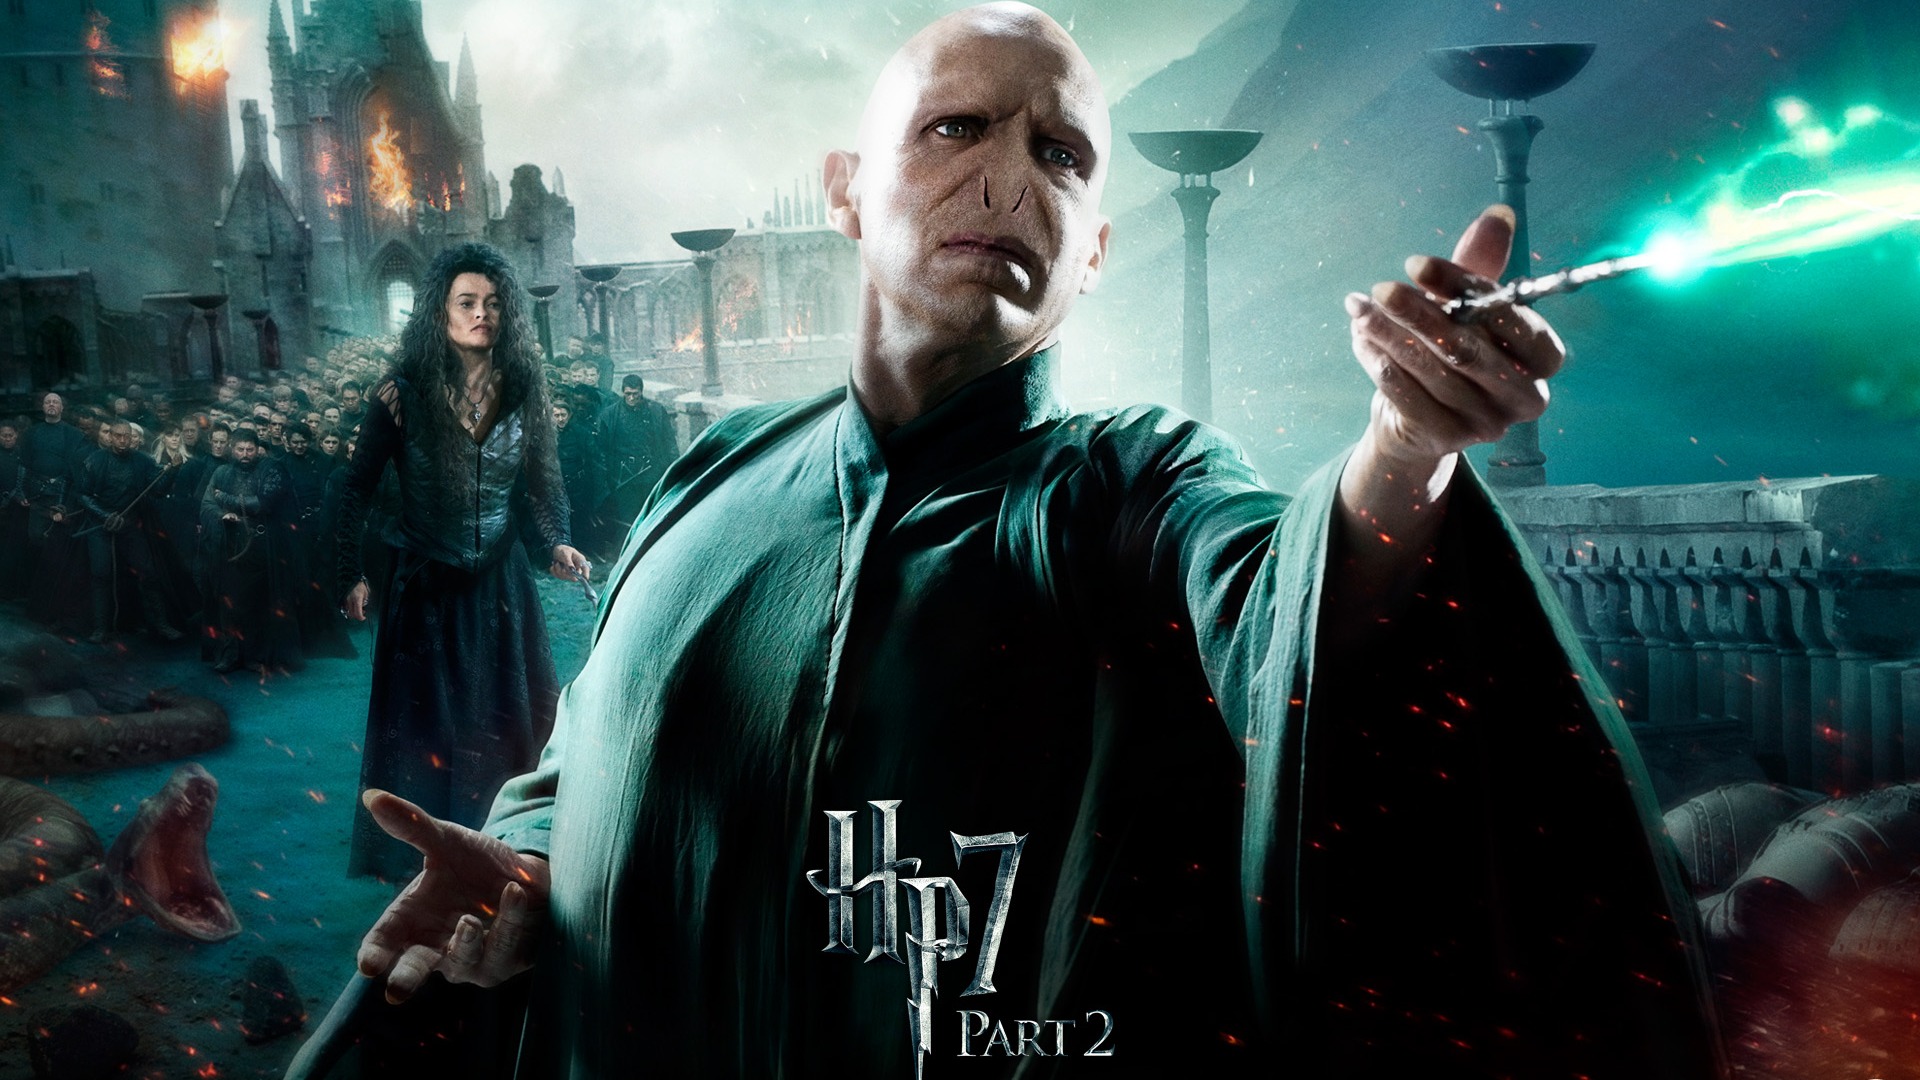 2011 Harry Potter and the Deathly Hallows HD wallpapers #21 - 1920x1080